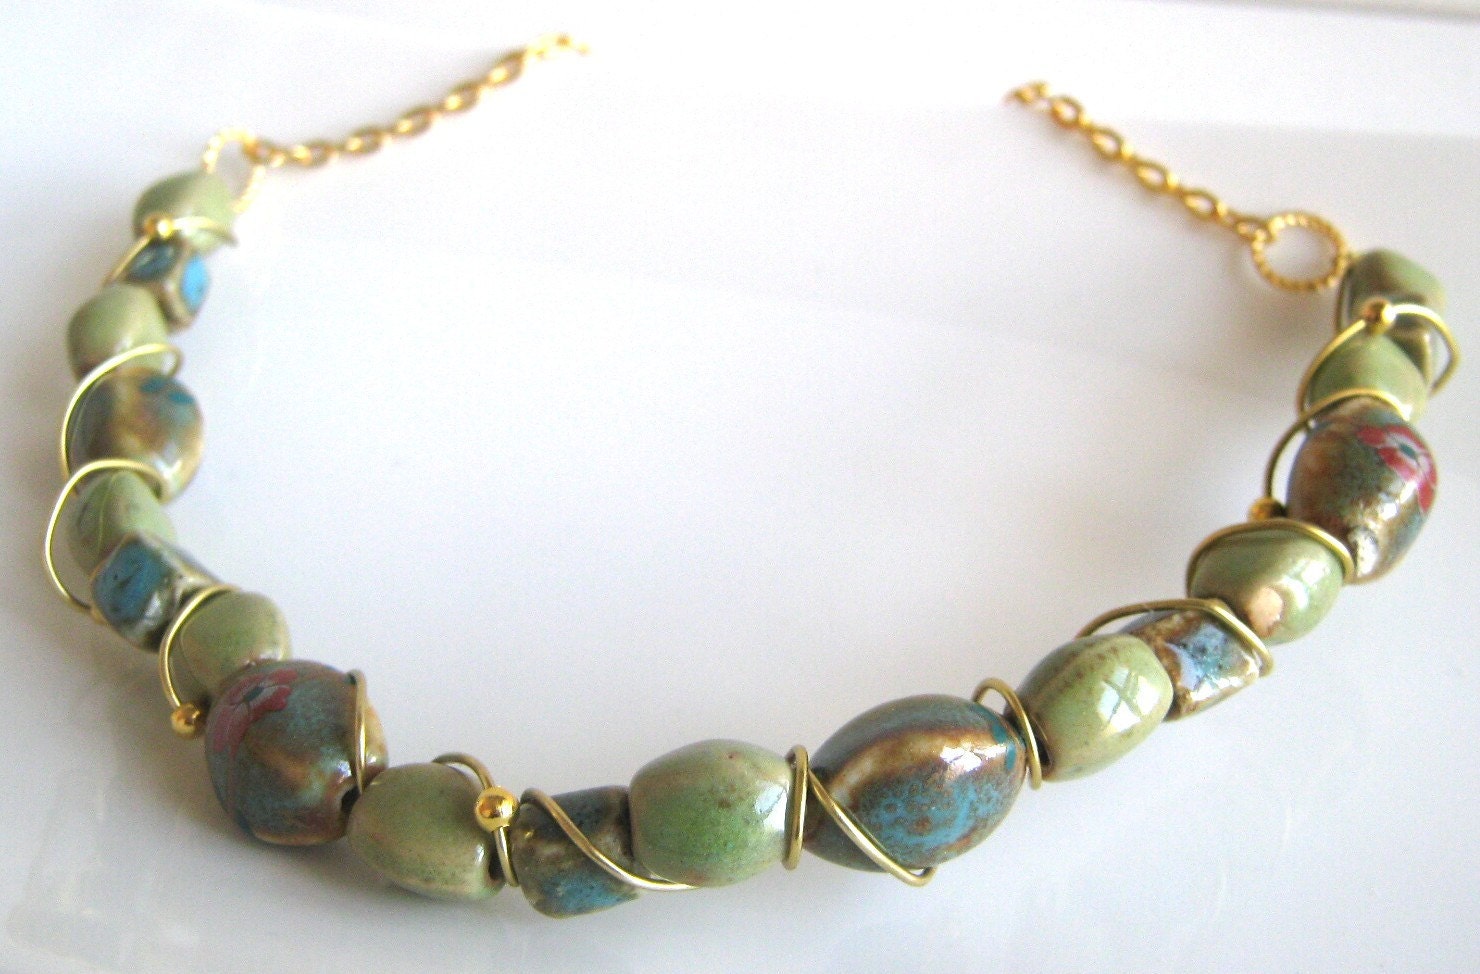 wire wrapped necklace in teal, green, blue - PORCELAIN PANSIES